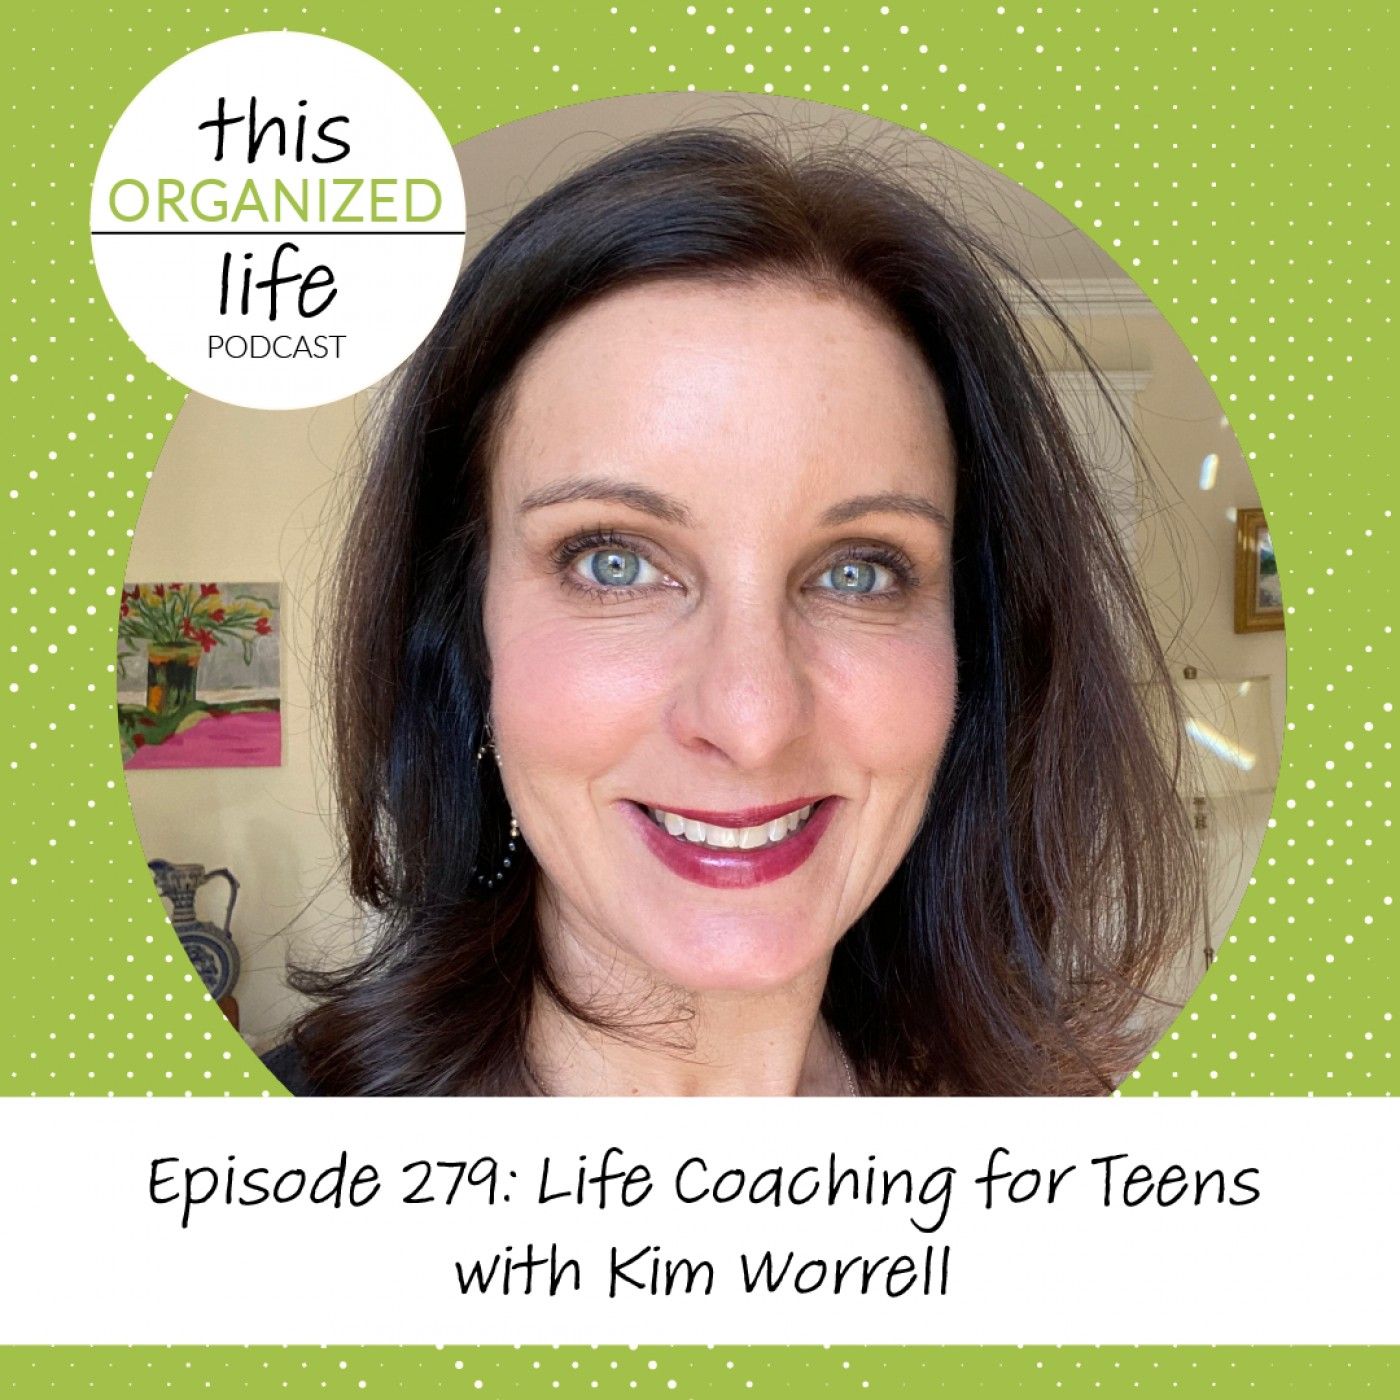 Ep 279: Life Coaching for Teens with Kim Worrell